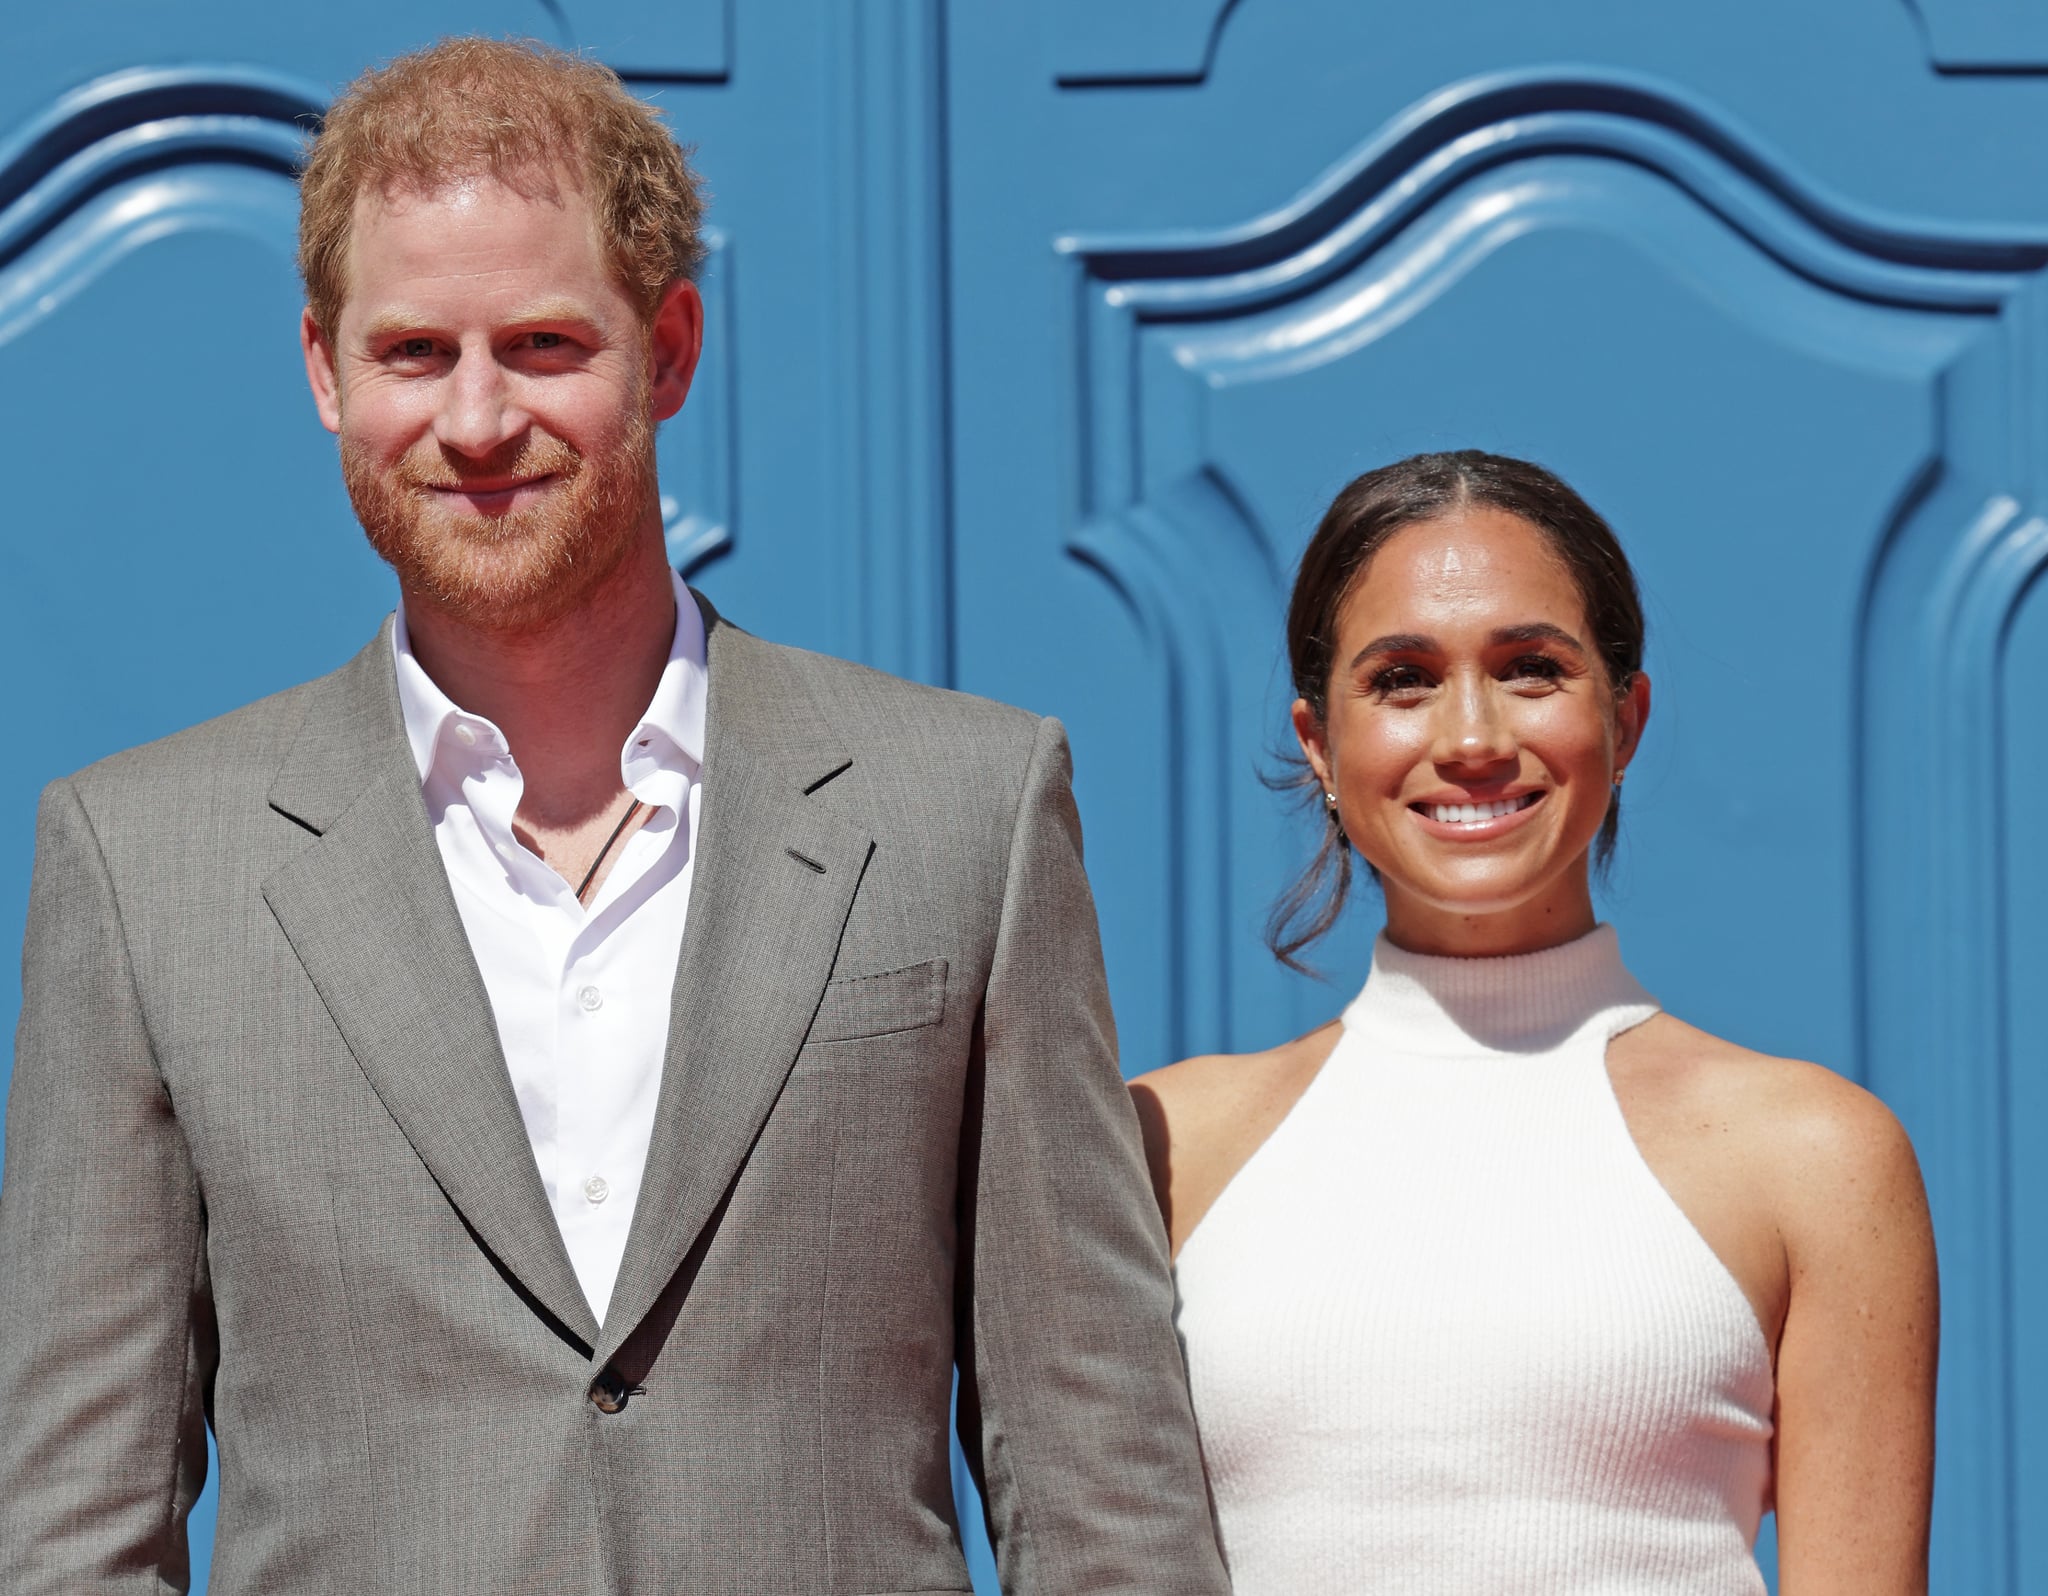 DUSSELDORF, GERMANY - SEPTEMBER 06: Prince Harry, Duke of Sussex and Meghan, Duchess of Sussex arrive at City Hall during the Invictus Games Dusseldorf 2023 - One Year To Go events on September 06, 2022 in Dusseldorf, Germany.  The Invictus Games is an international multi-sport event that was first held in 2014 for wounded, injured and ill servicewomen and men, both serving and veterans.  The games were founded by Prince Harry, Duke of Sussex, whose inspiration came from his visit to the Warrior Games in the United States, where he witnessed the sport's ability to help both mentally and physically.  (Photo by Chris Jackson/Getty Images for Invictus Games Dusseldorf 2023)